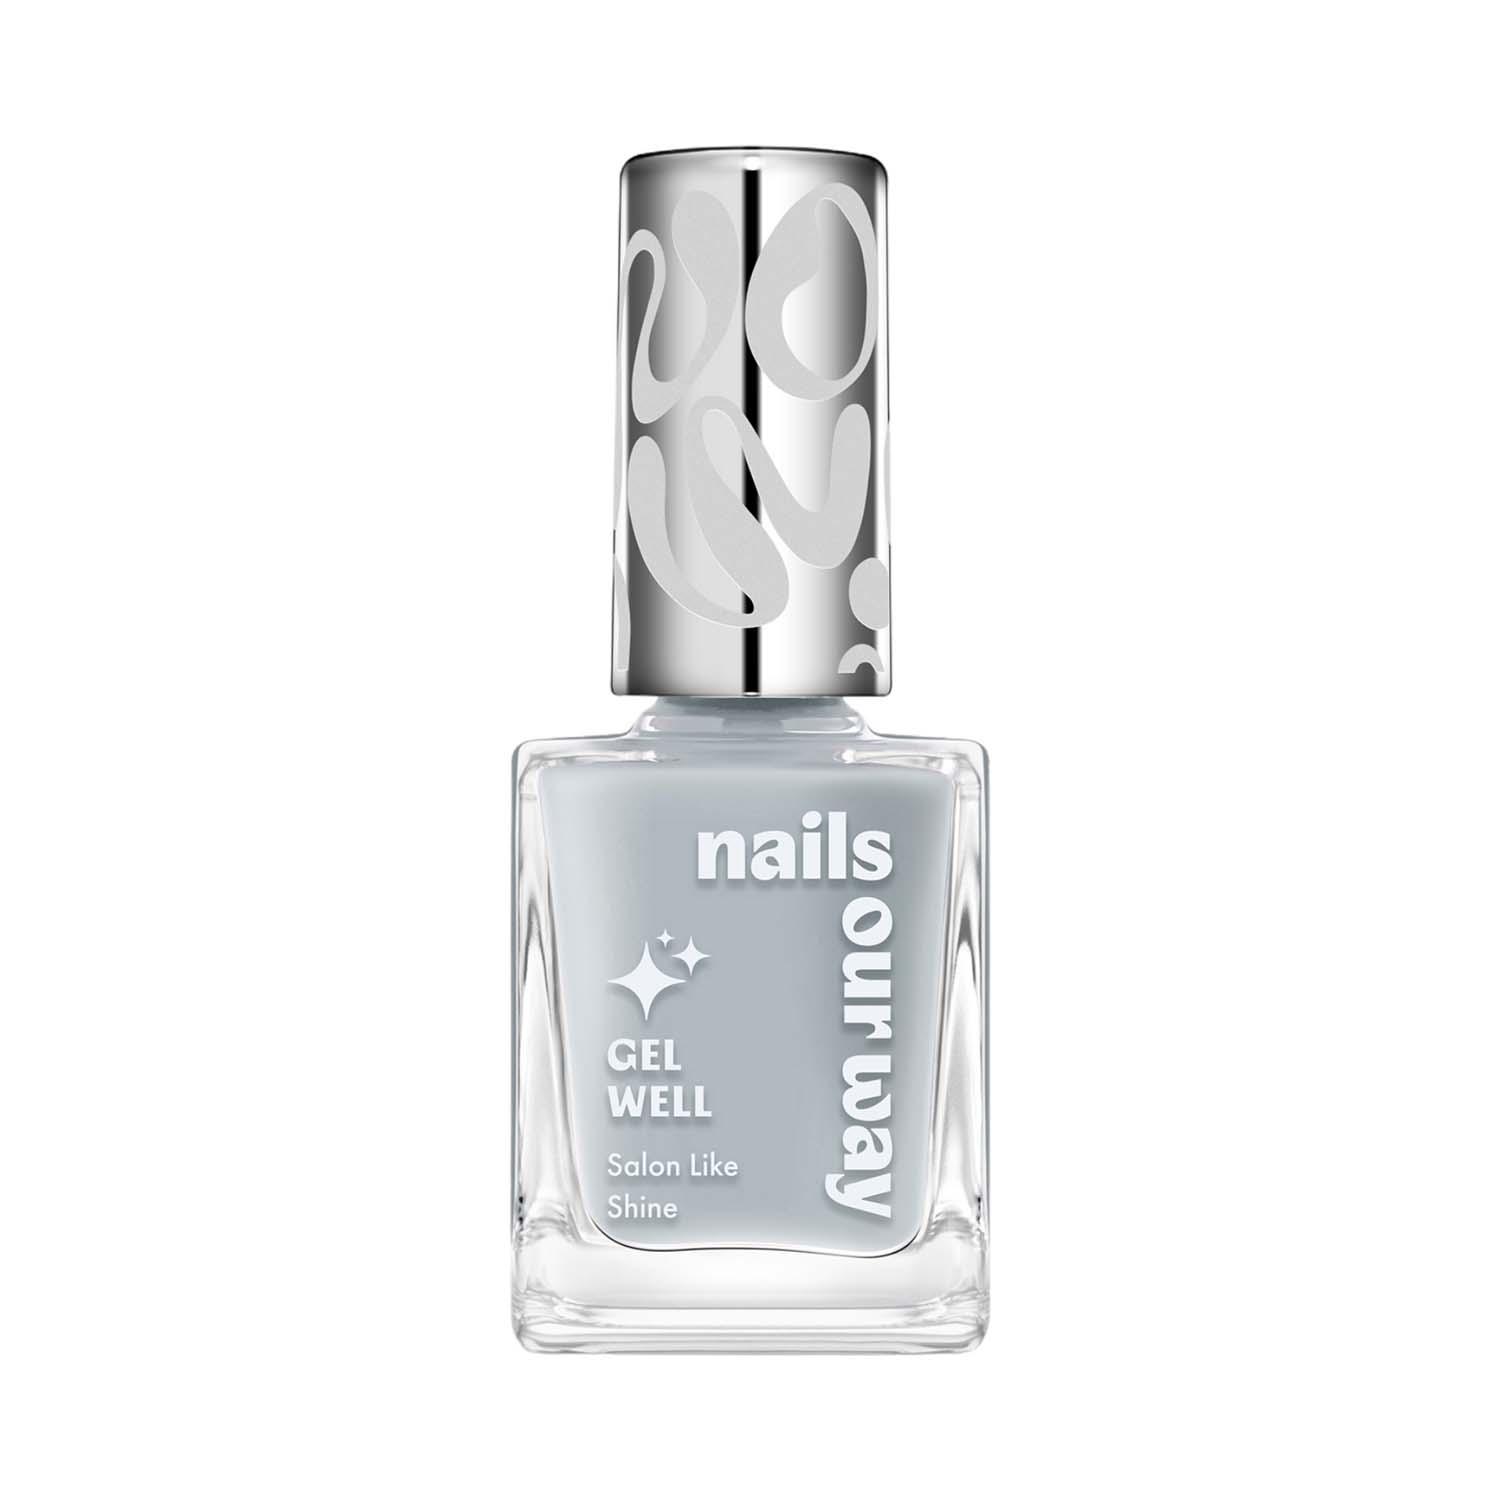 Nails Our Way | Nails Our Way Gel Well Nail Enamel - 702 Fearless (10 ml)